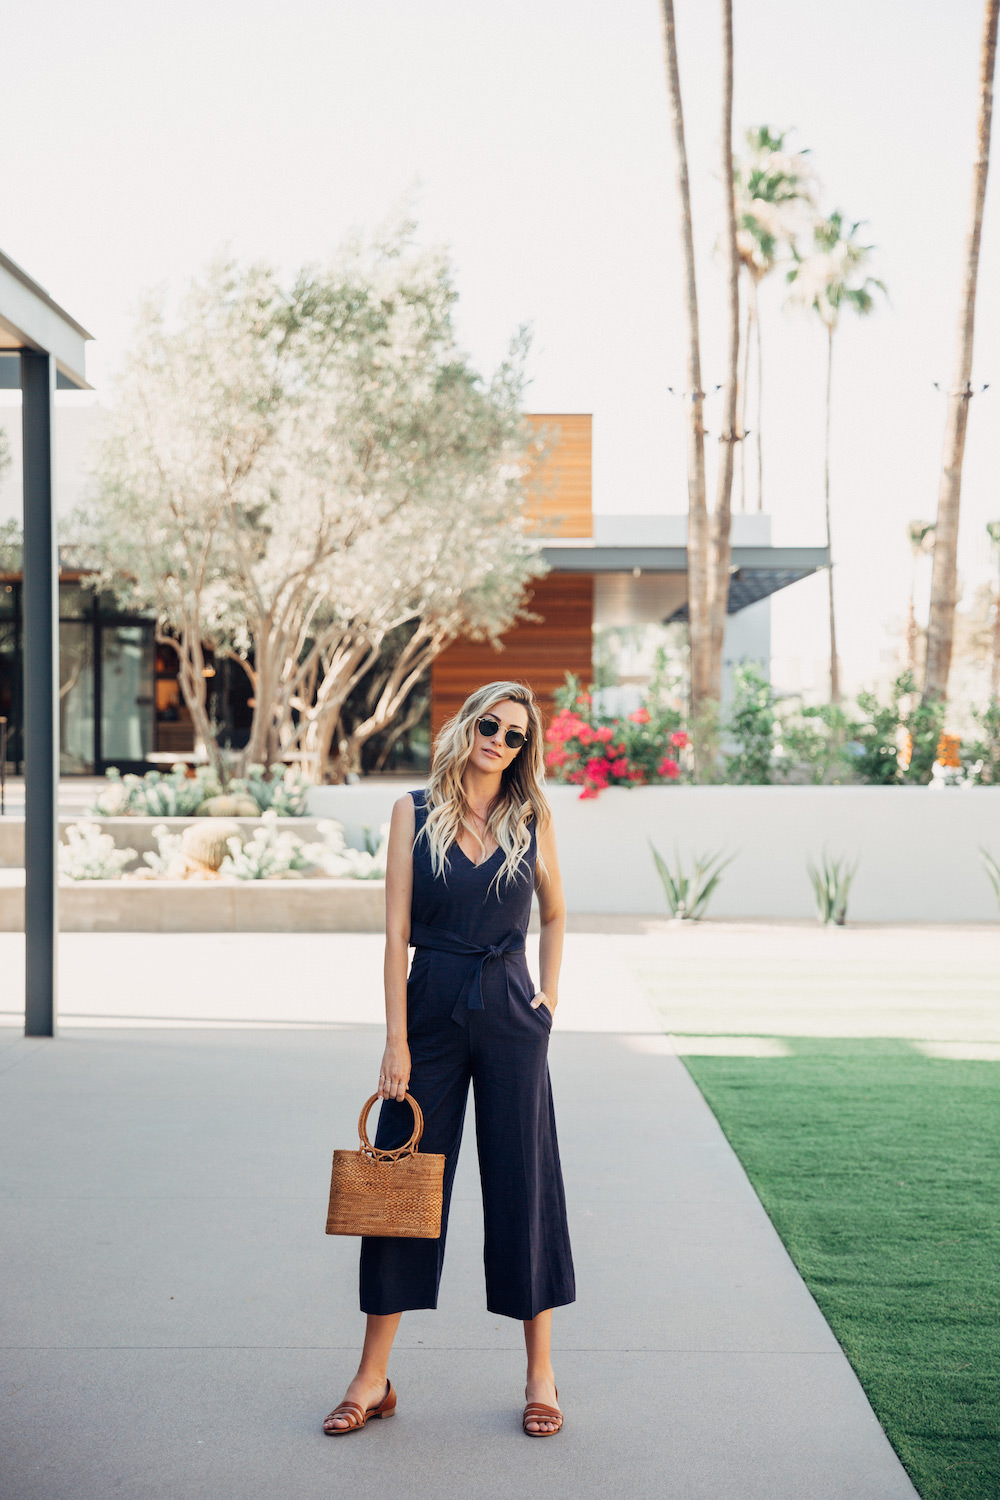 Arizona staycation at the Andaz Resort by Dash of Darling.